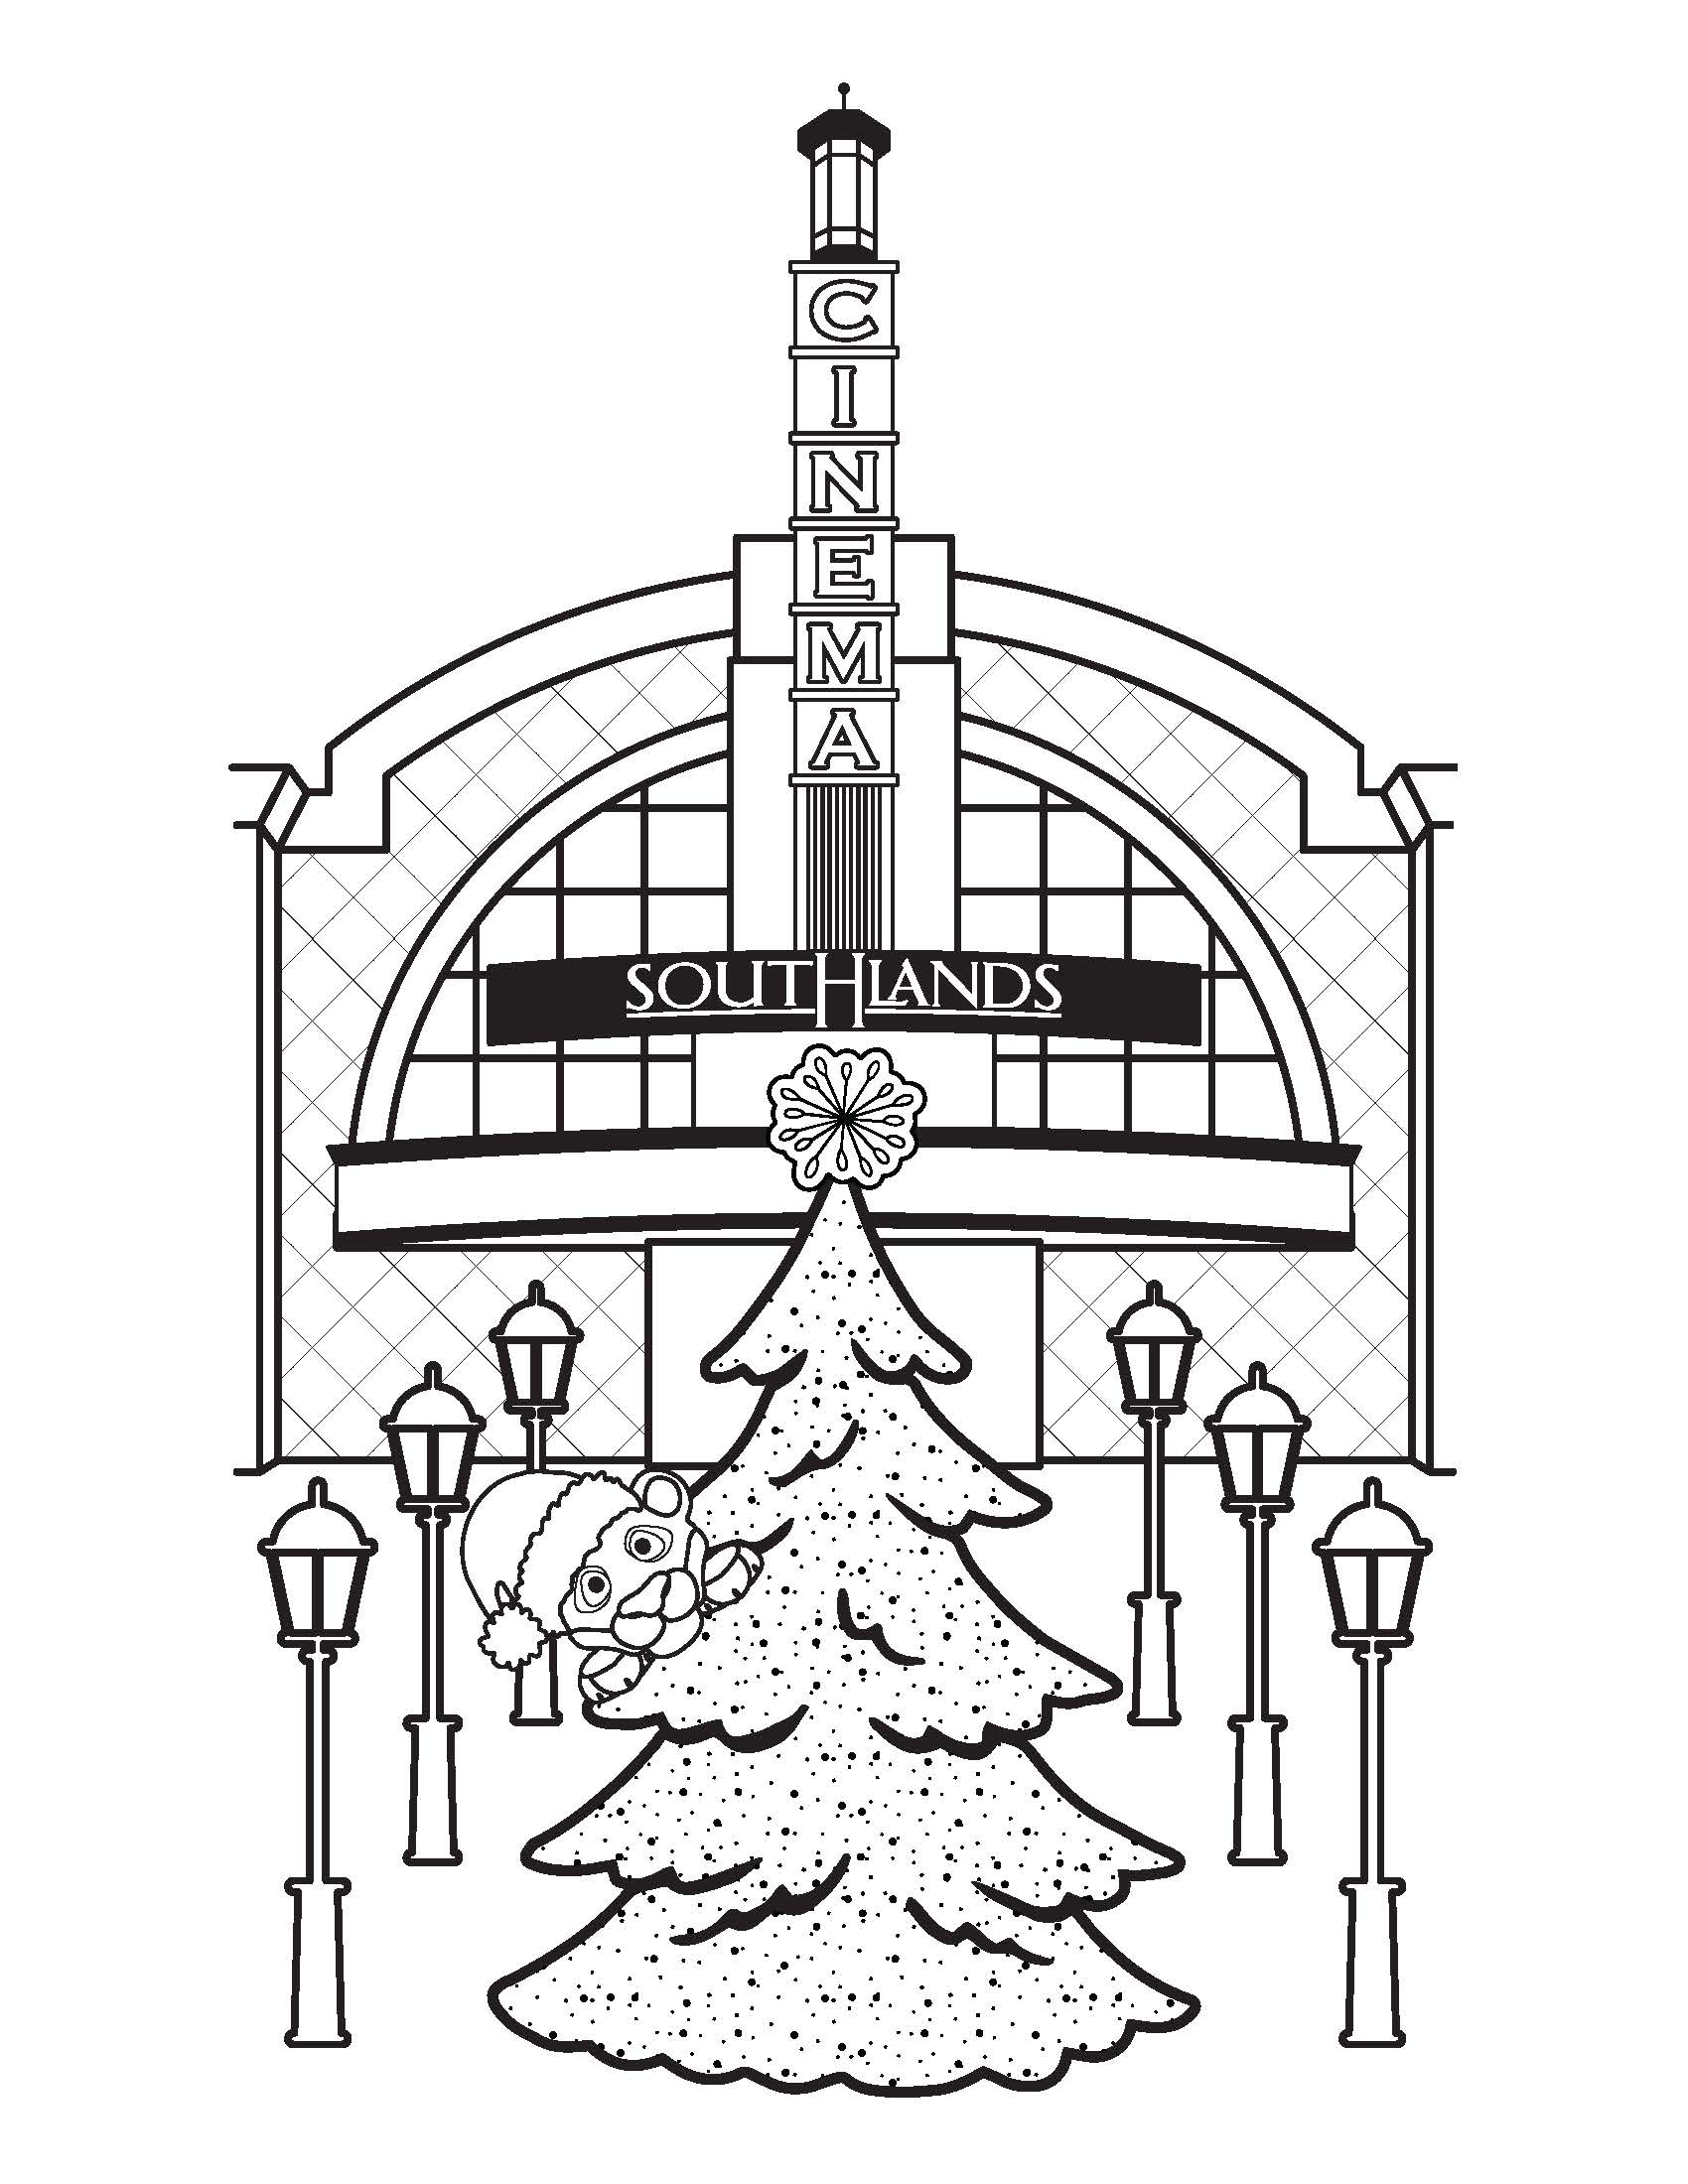 print your own coloring pages